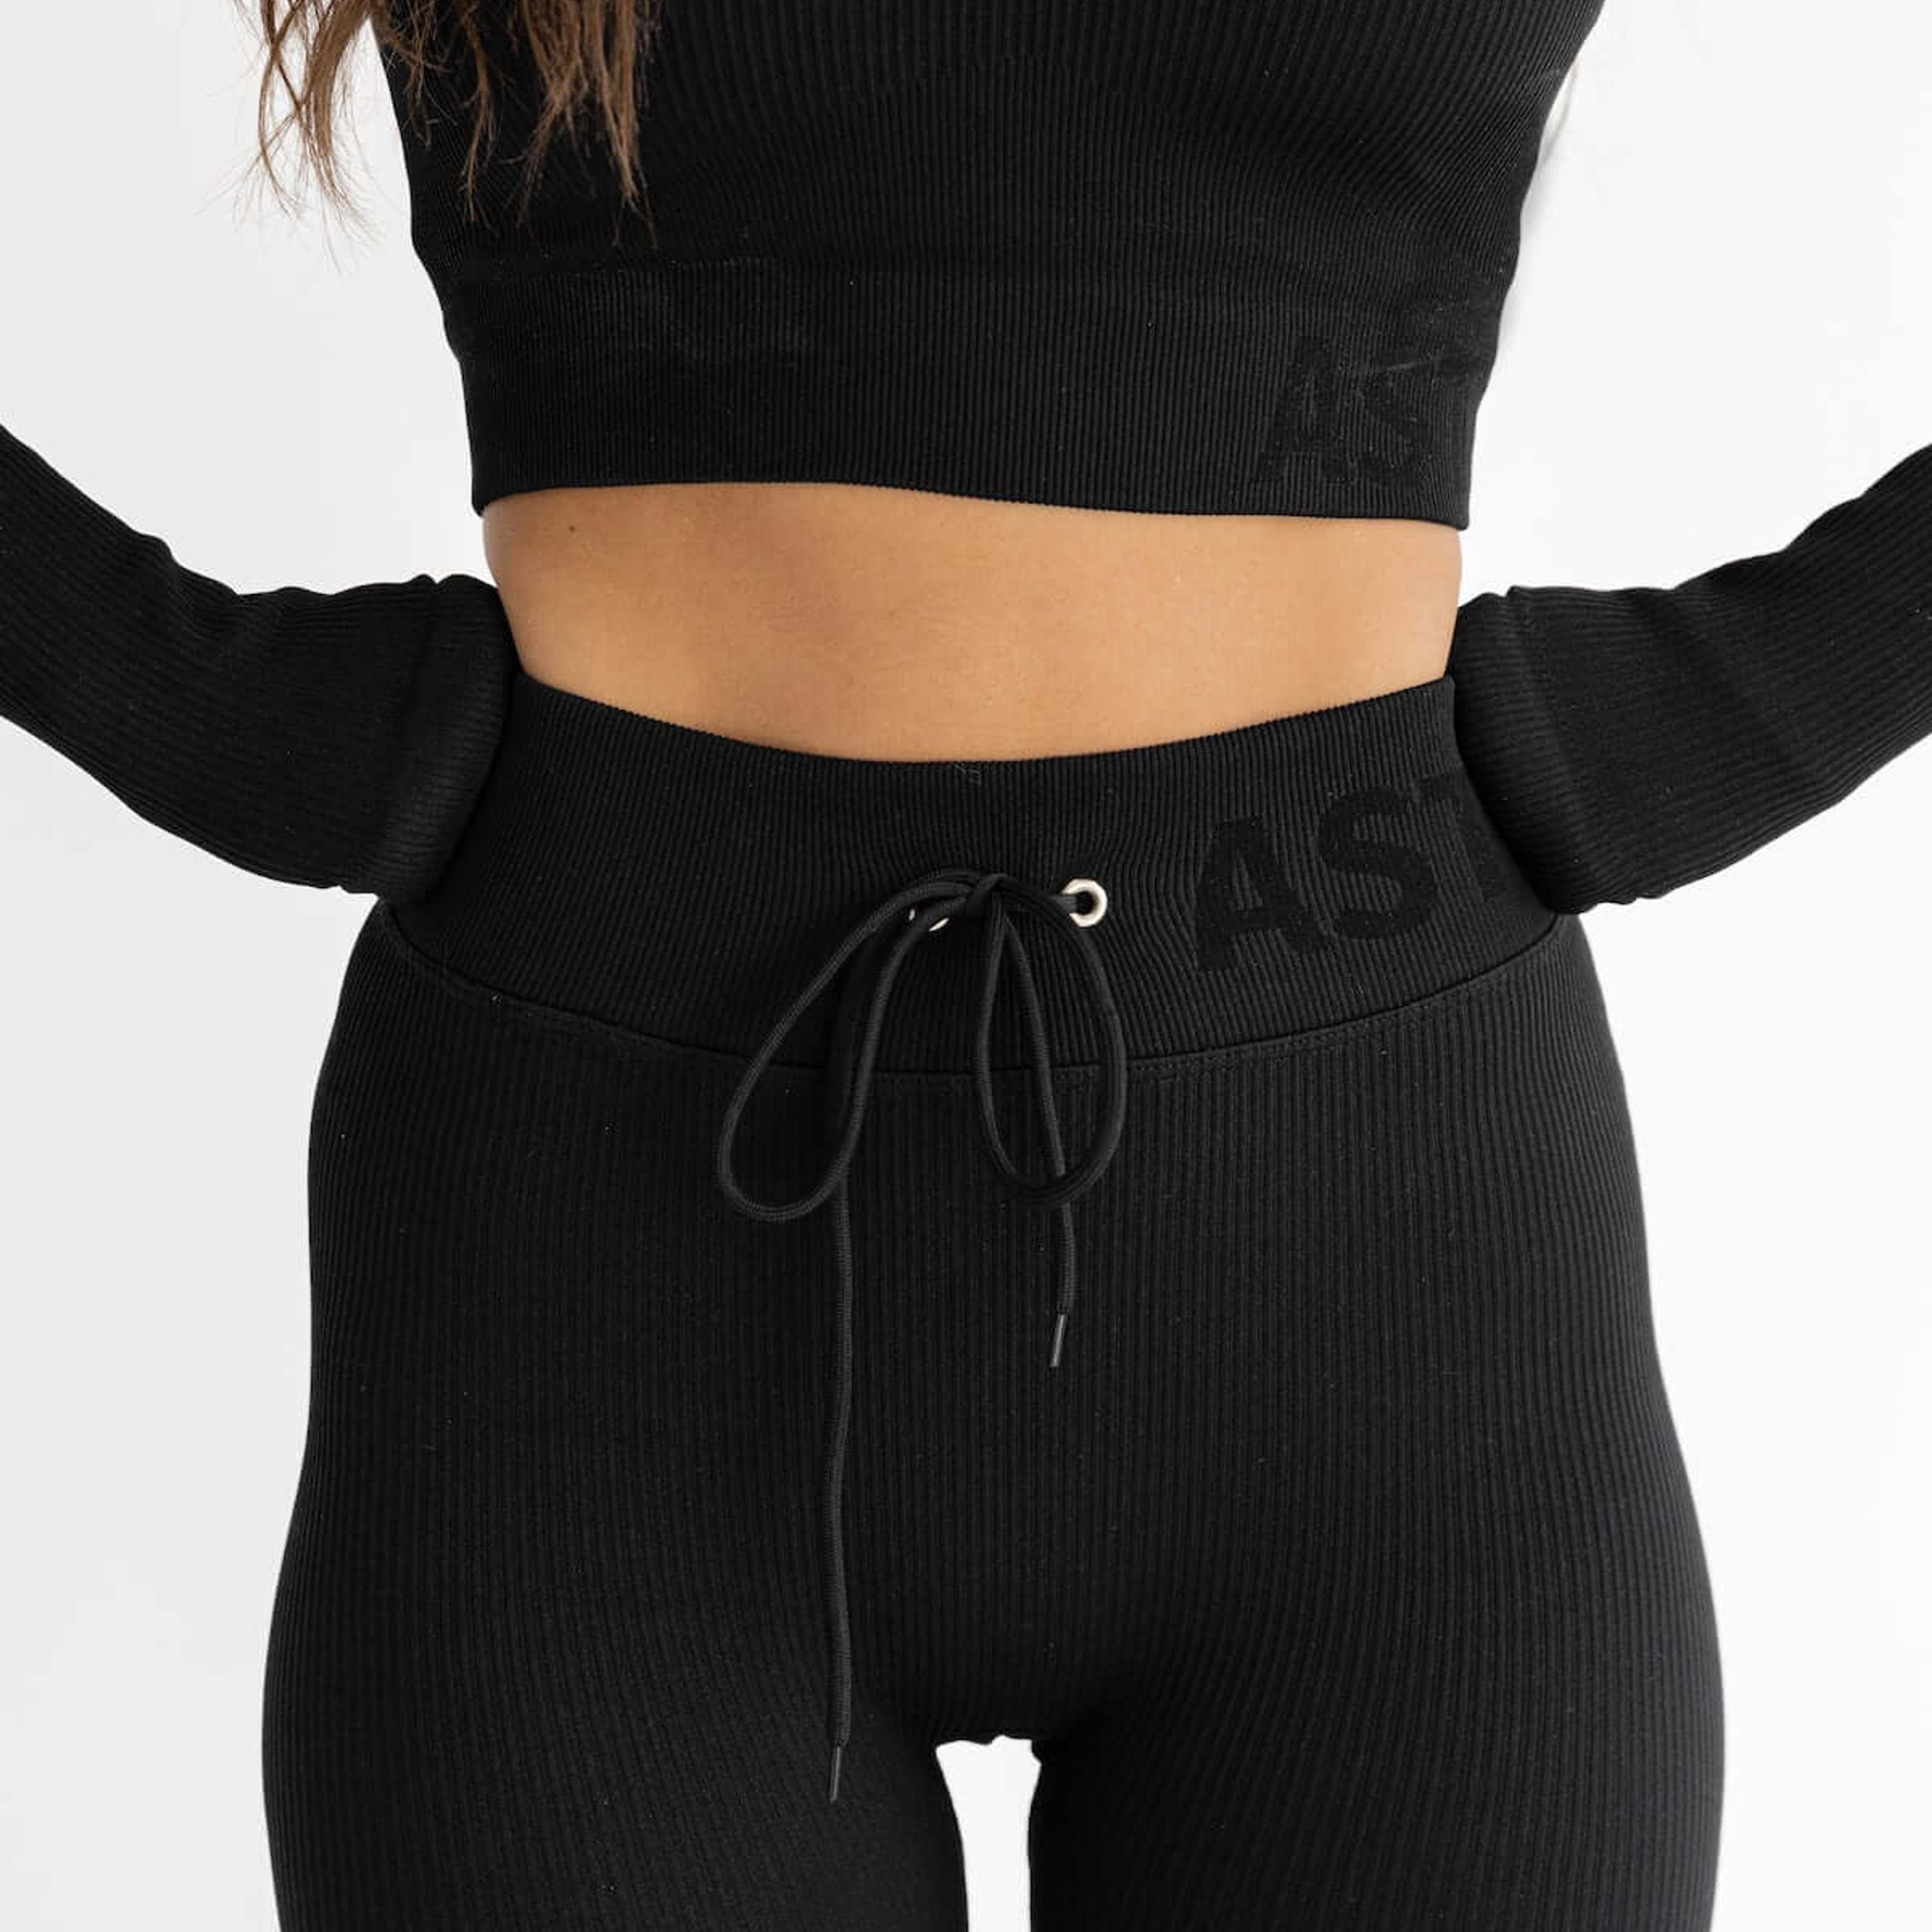 https://cdn.prod.marmalade.co/products/3840x3840/filters:quality(80)/www.astoria-activewear.com%2Fproducts%2Fastoria-seamless-ribbed-series-legging-black%2F1642196436%2F675A8453.jpg